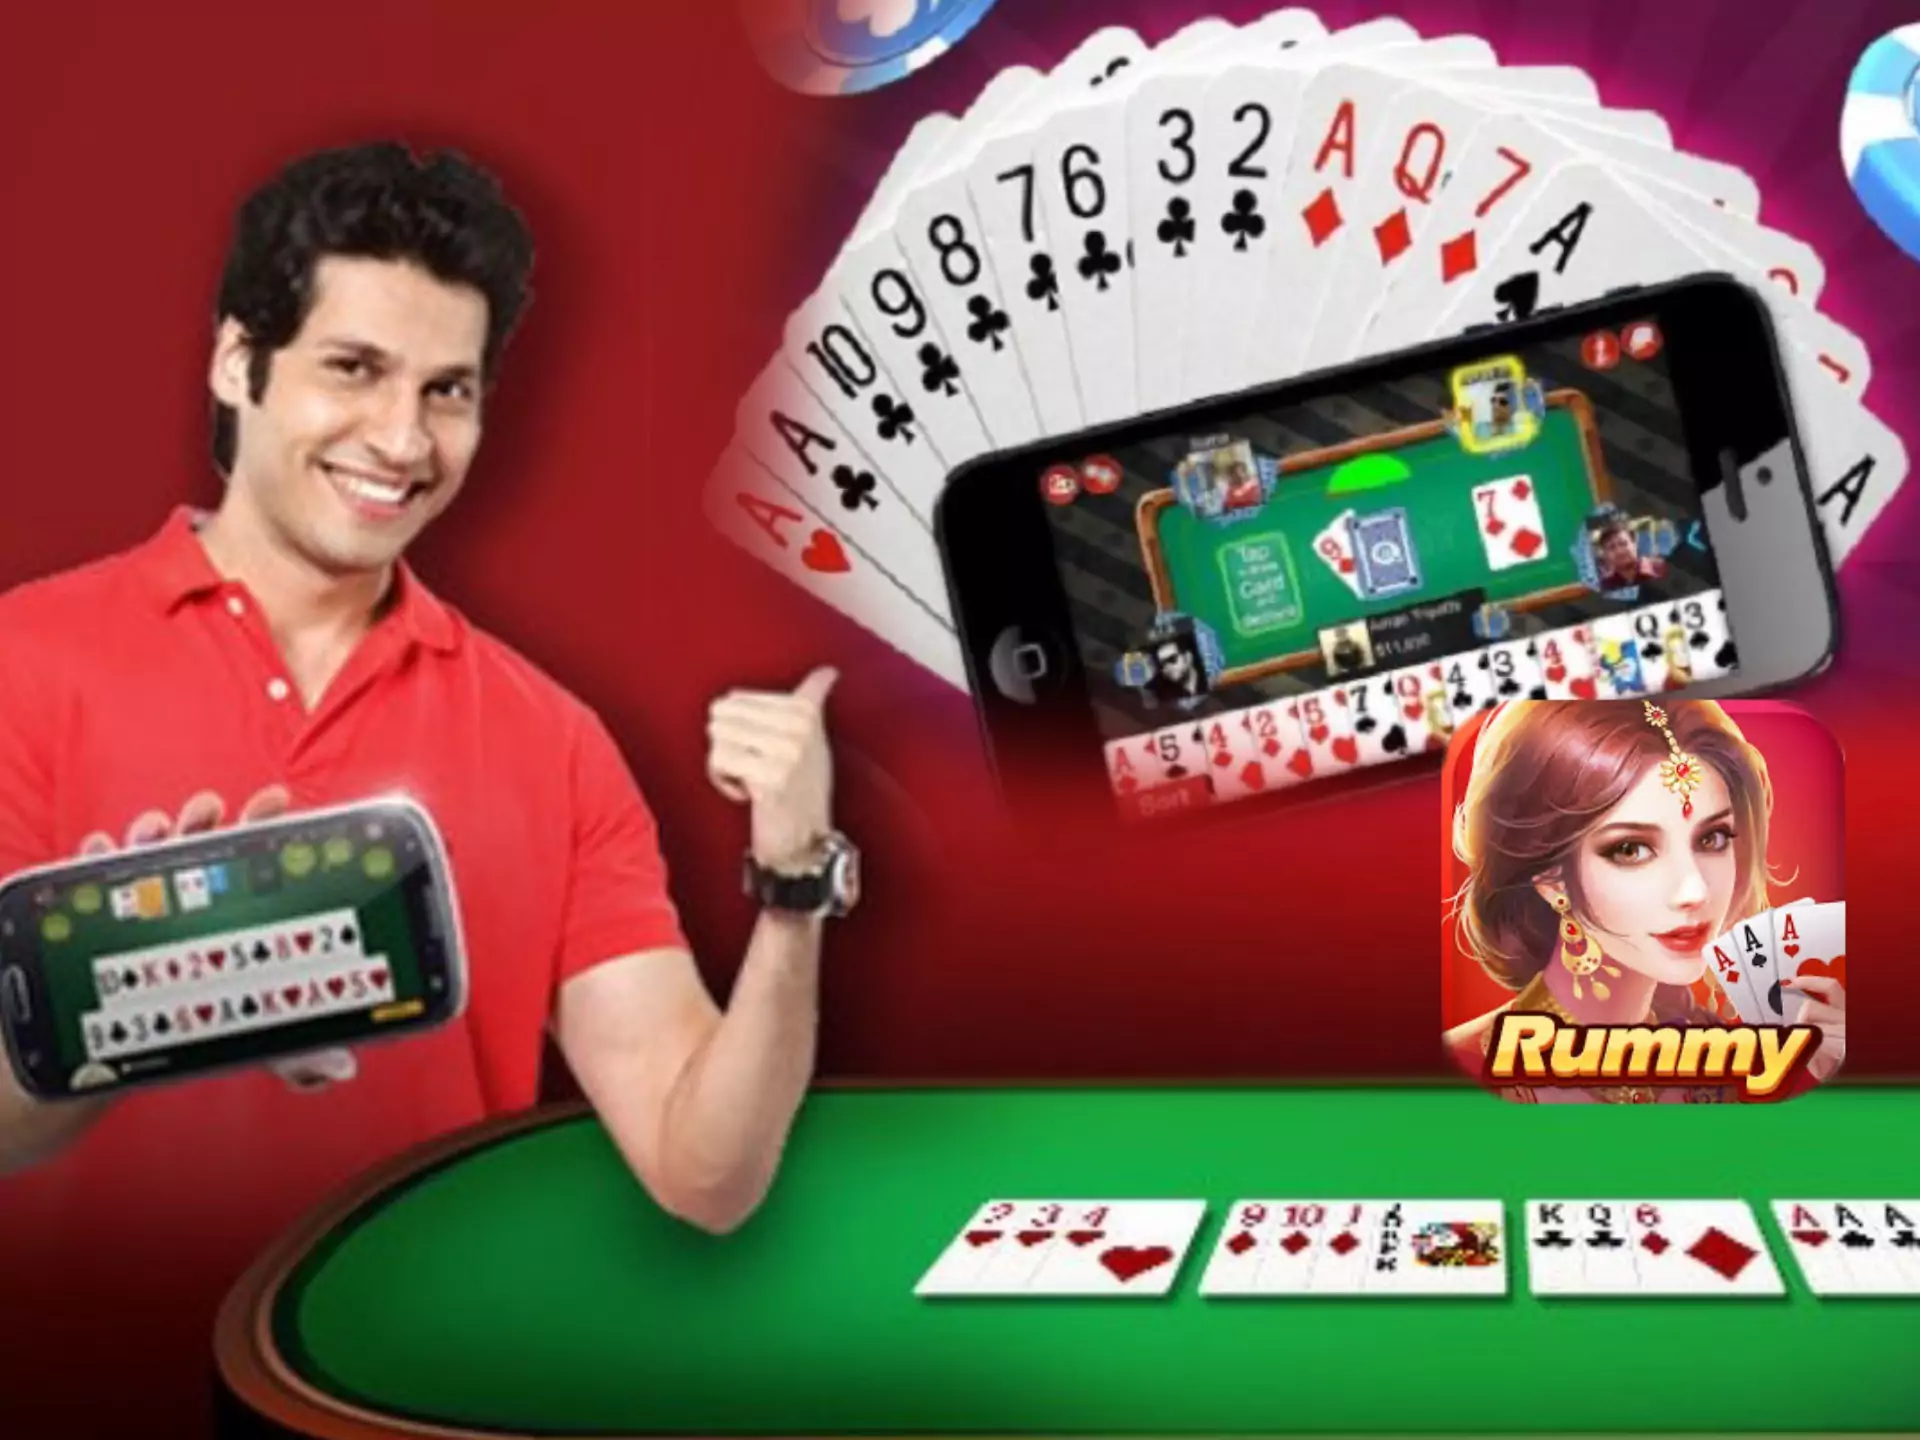 Register at an online casino and play rummy on money.